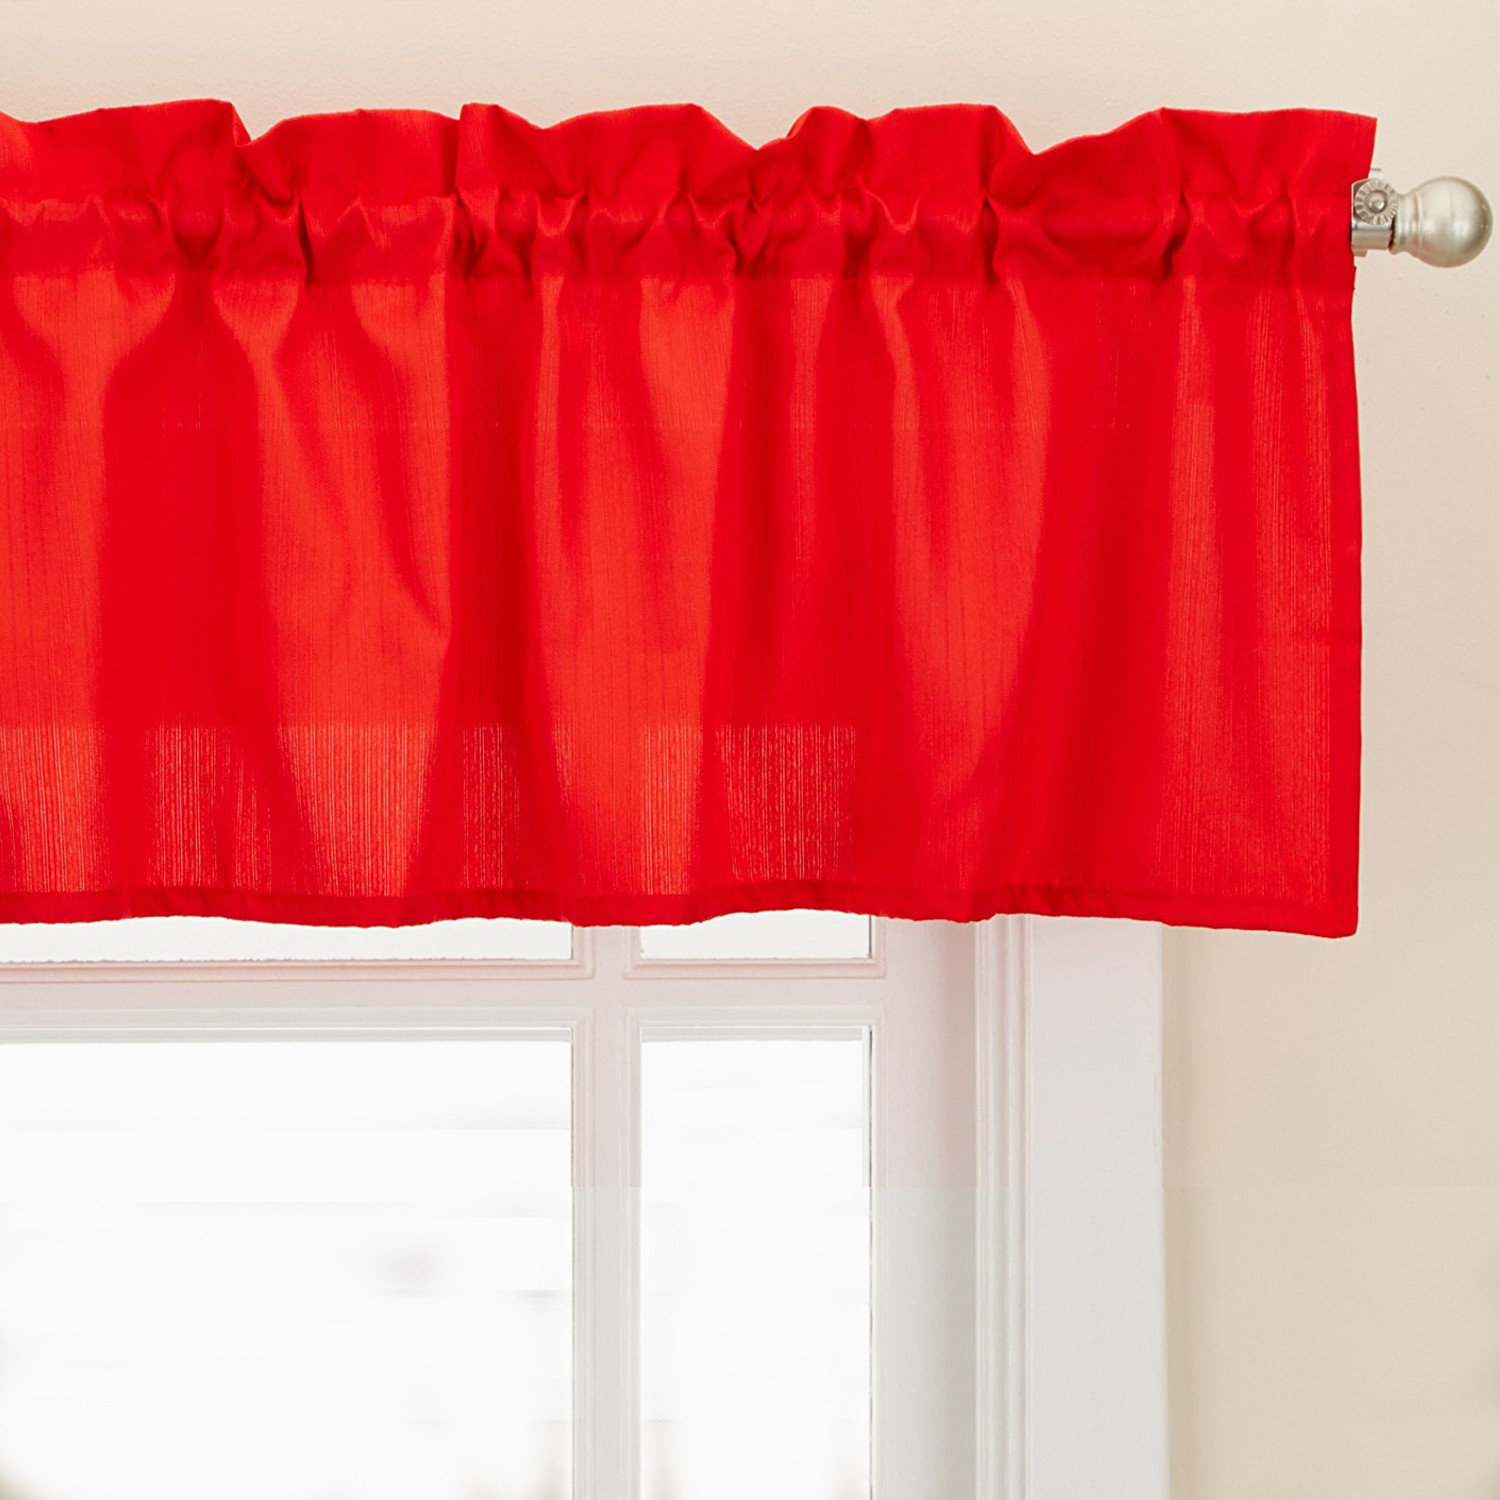 Red Valance Curtains For Kitchen
 Red Opaque Solid Ribcord Kitchen Curtains Choice of Tier